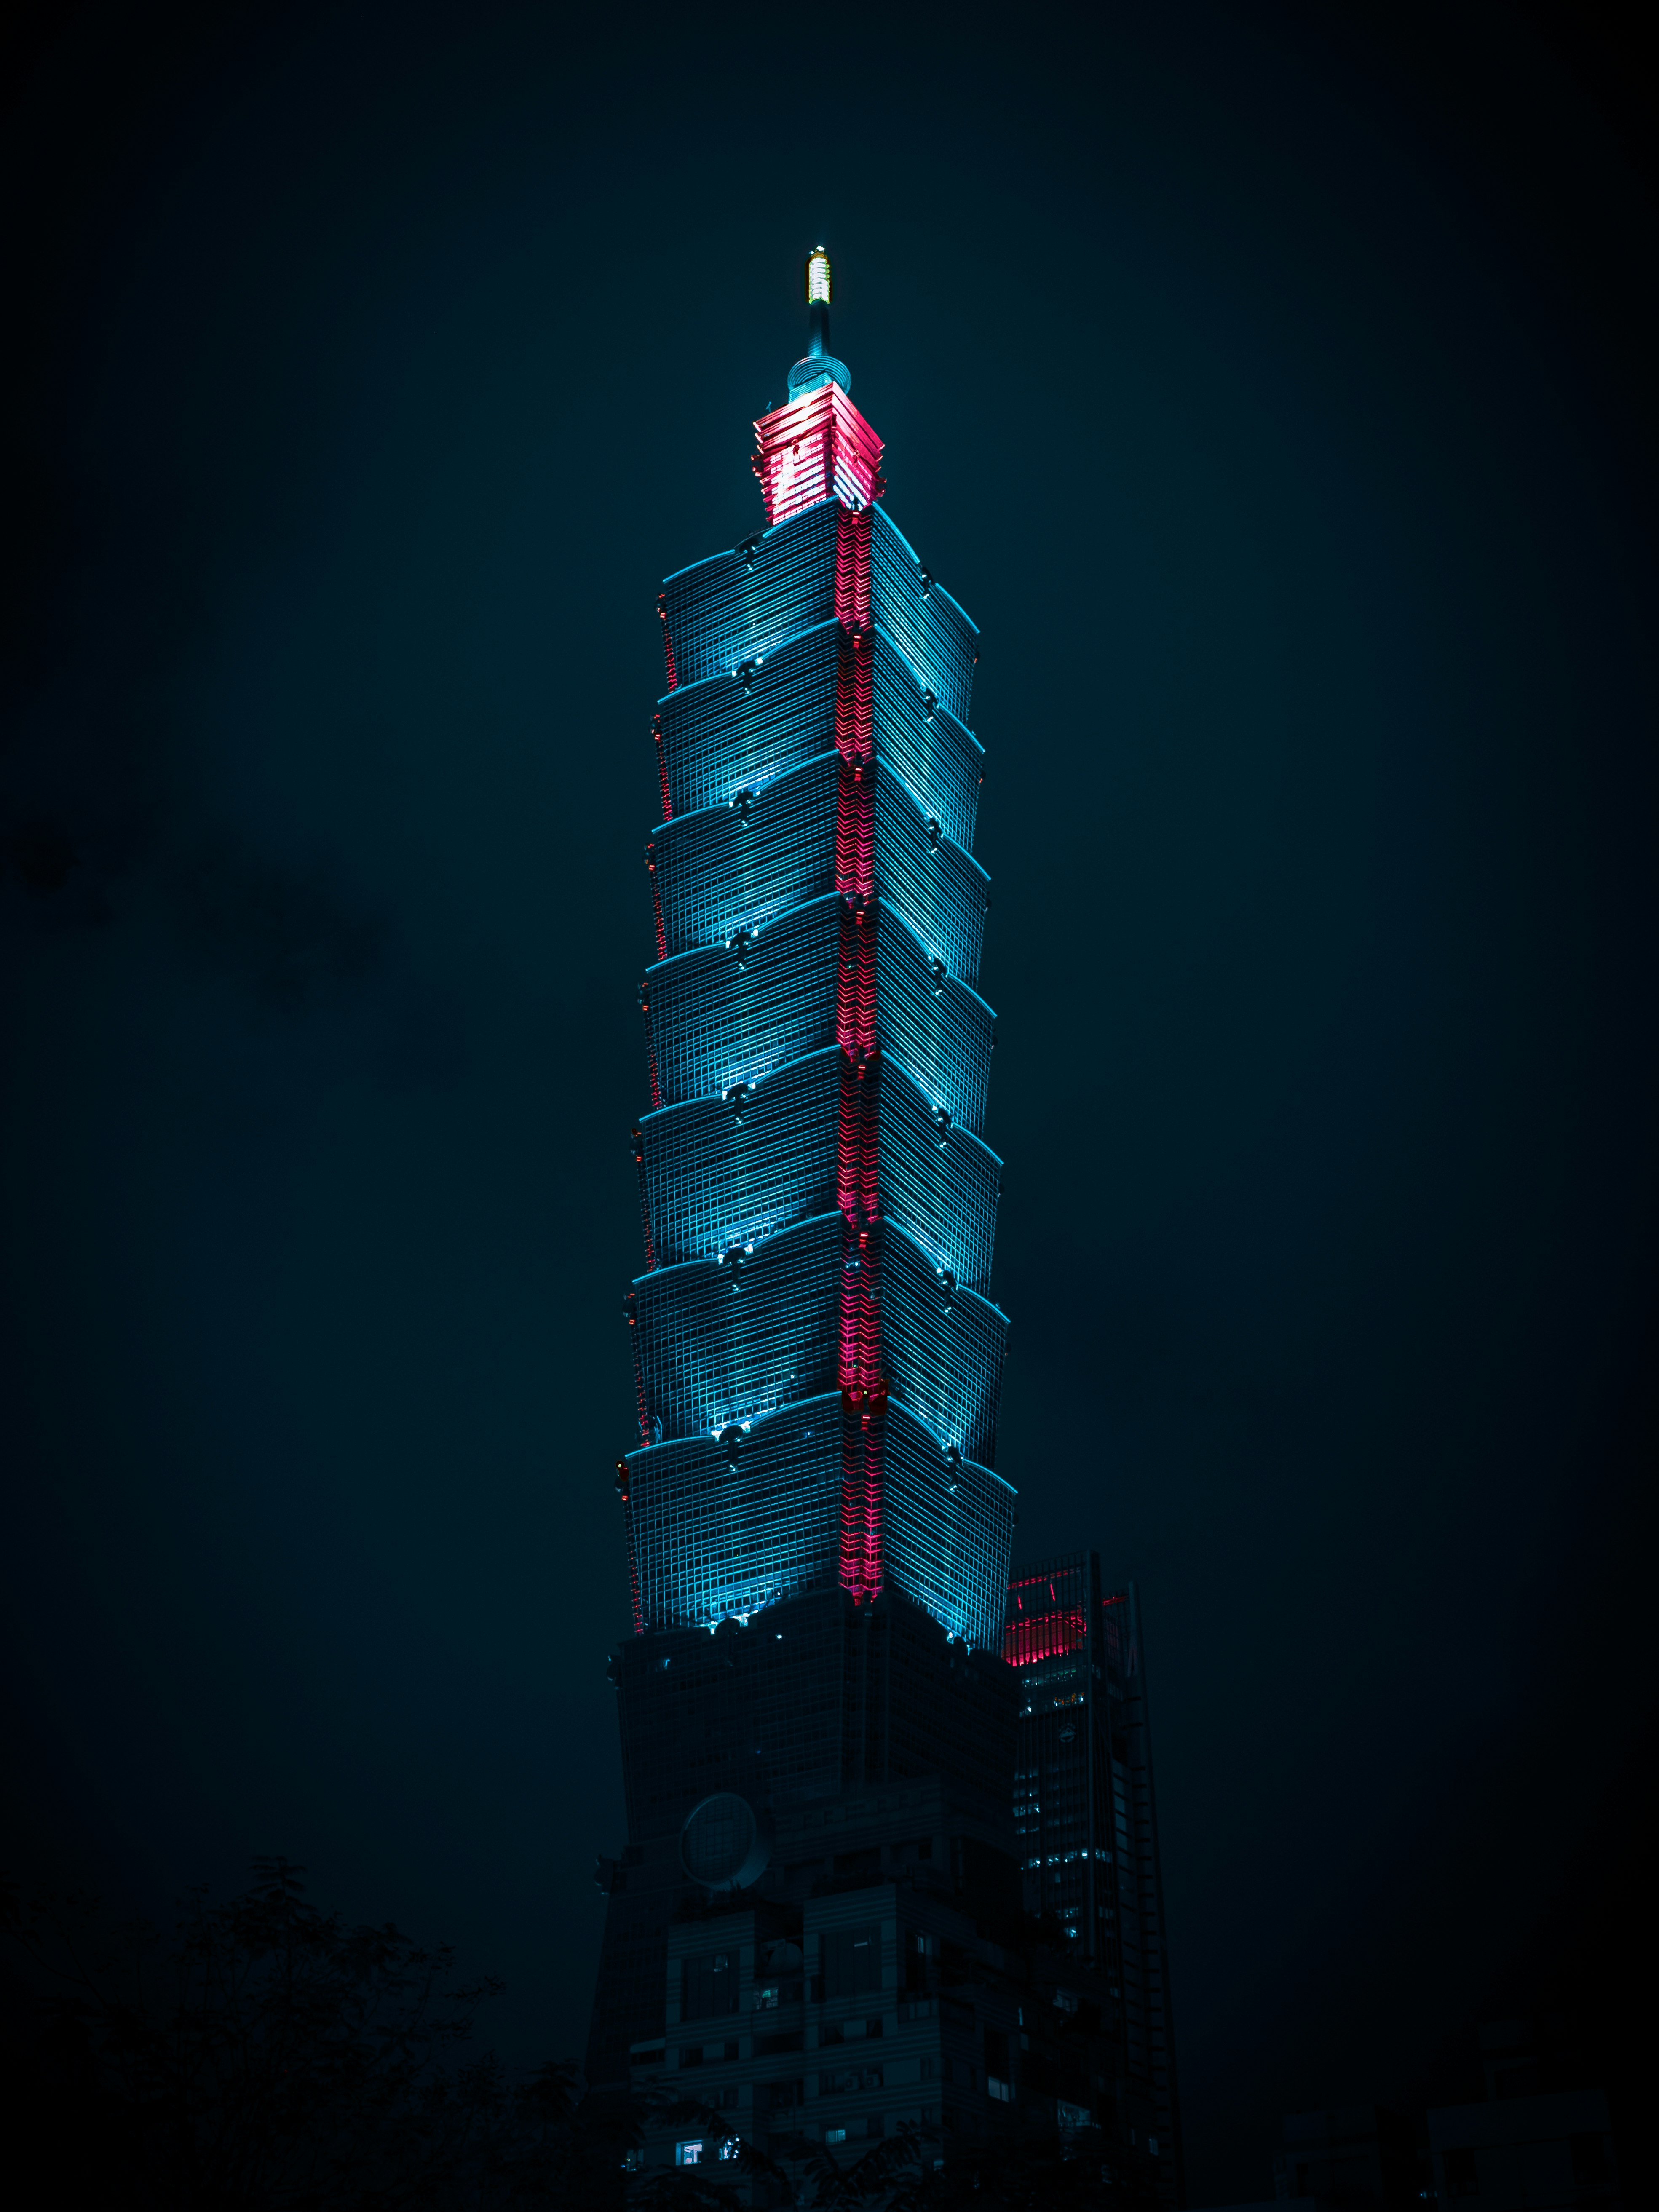 red and white tower during night time